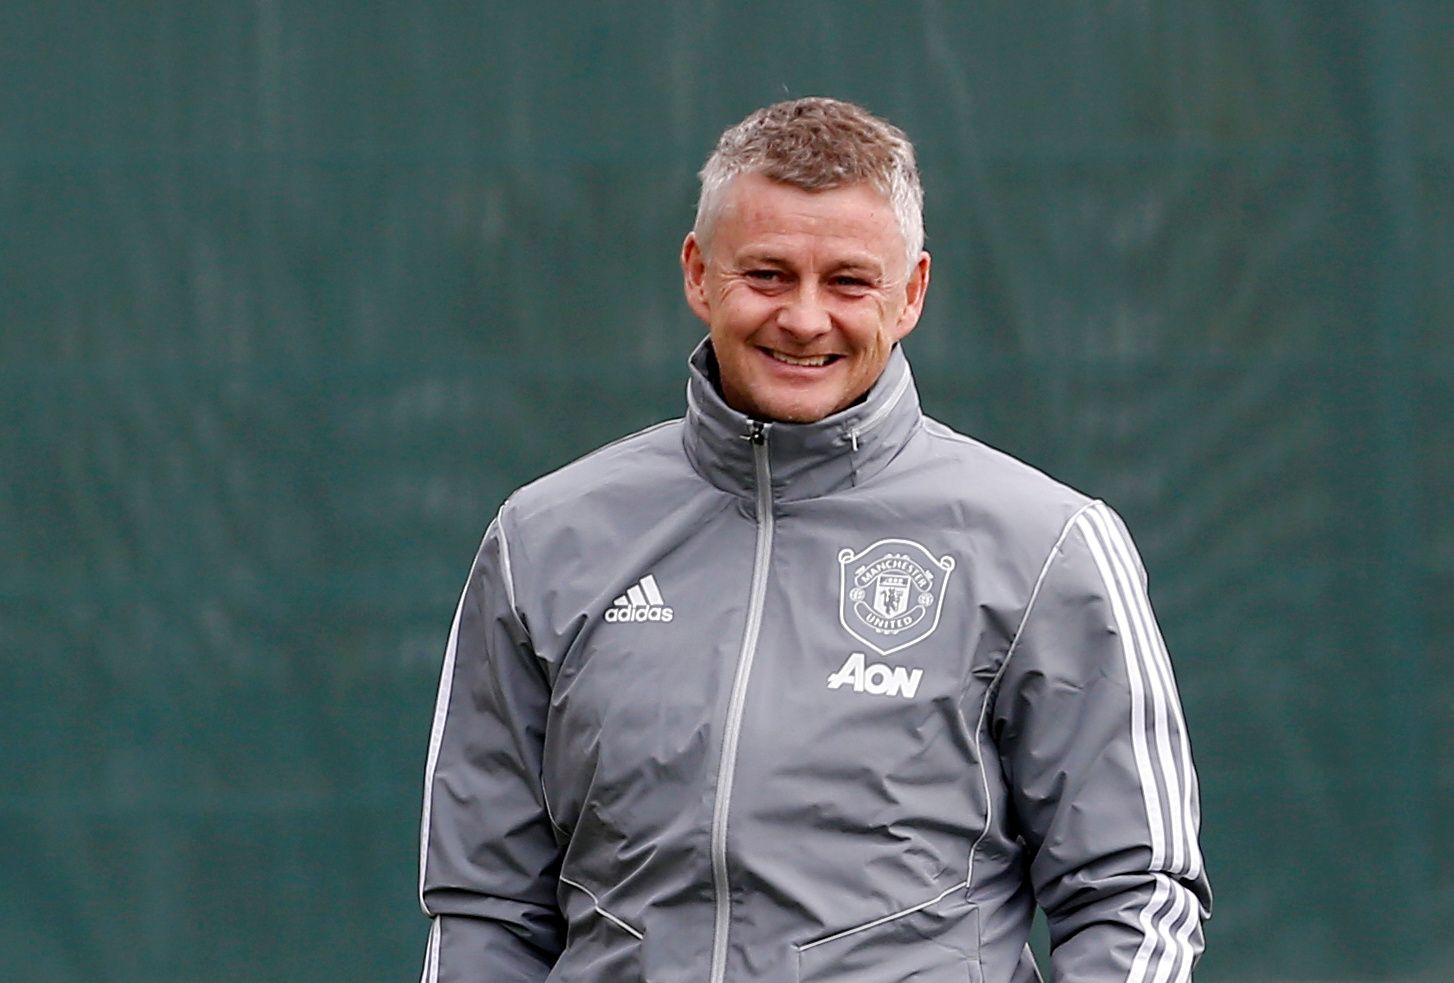 Soccer Football - Europa League - Manchester United Training - Aon Training Complex, Manchester, Britain - March 11, 2020 Manchester United manager Ole Gunnar Solskjaer during training Action Images via Reuters/Craig Brough